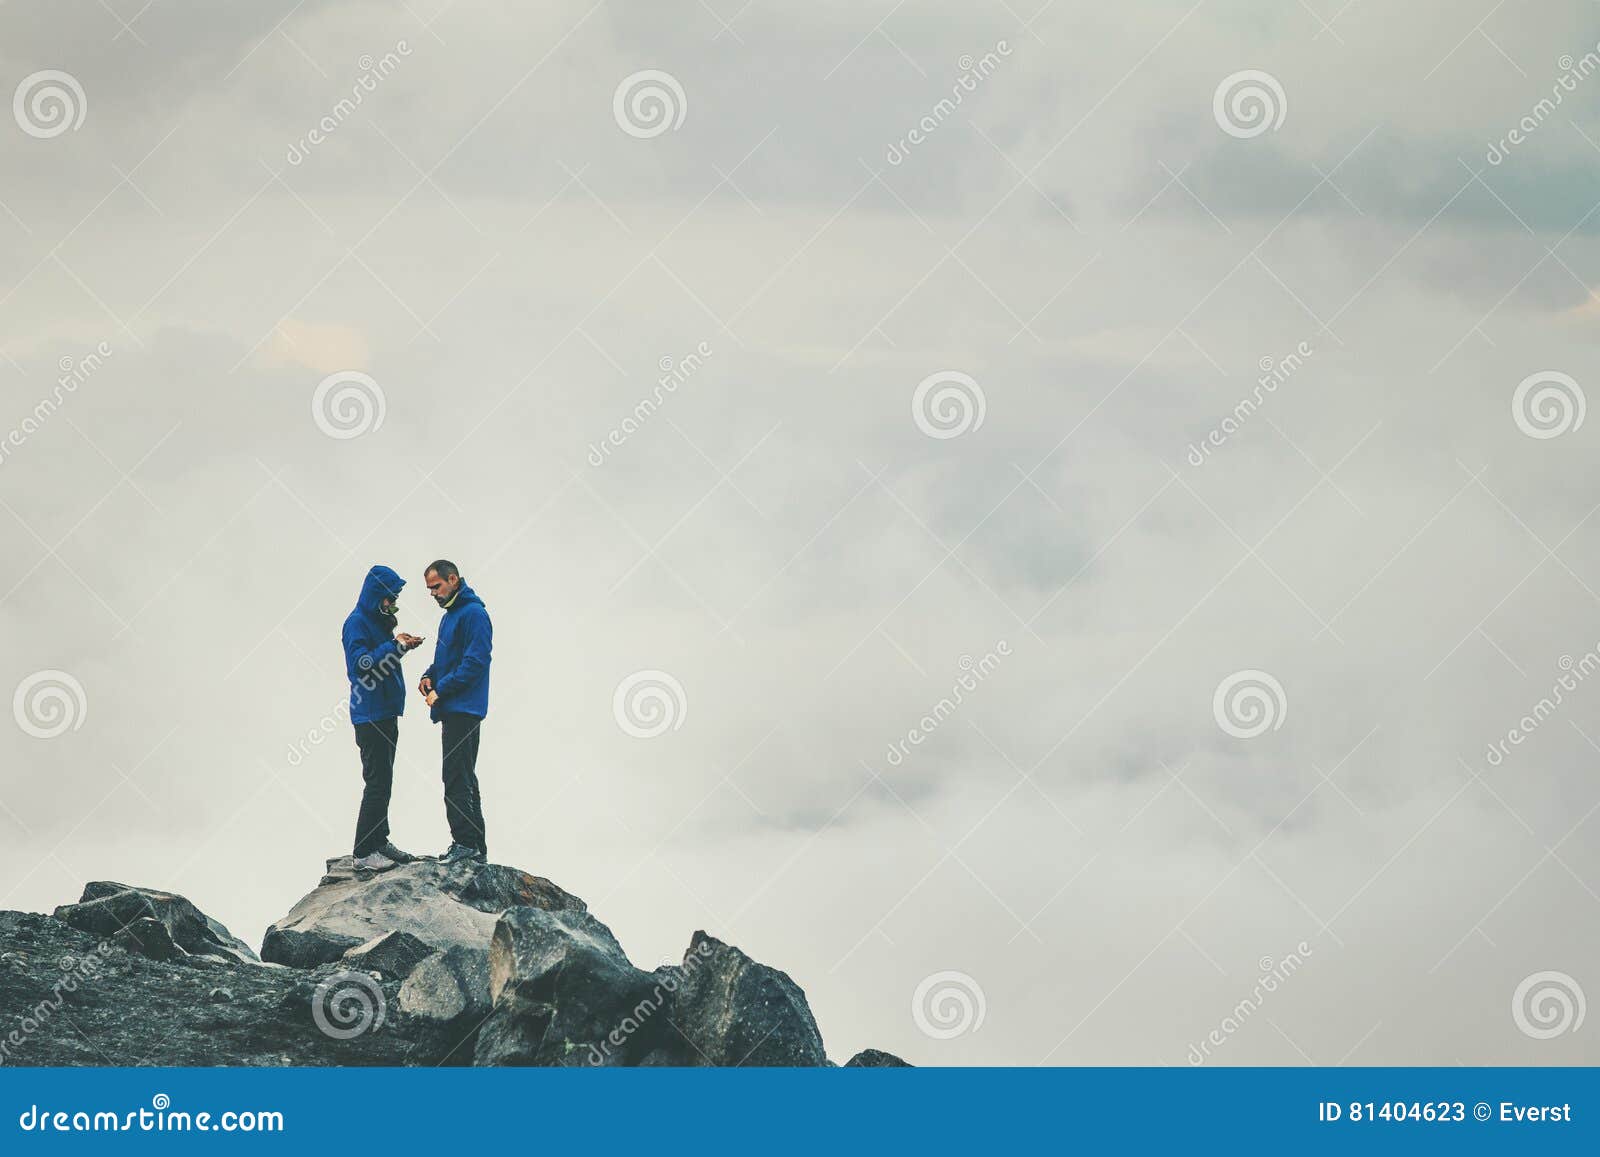 Couple Travelers in Love Standing on Cliff Together Stock Image - Image ...